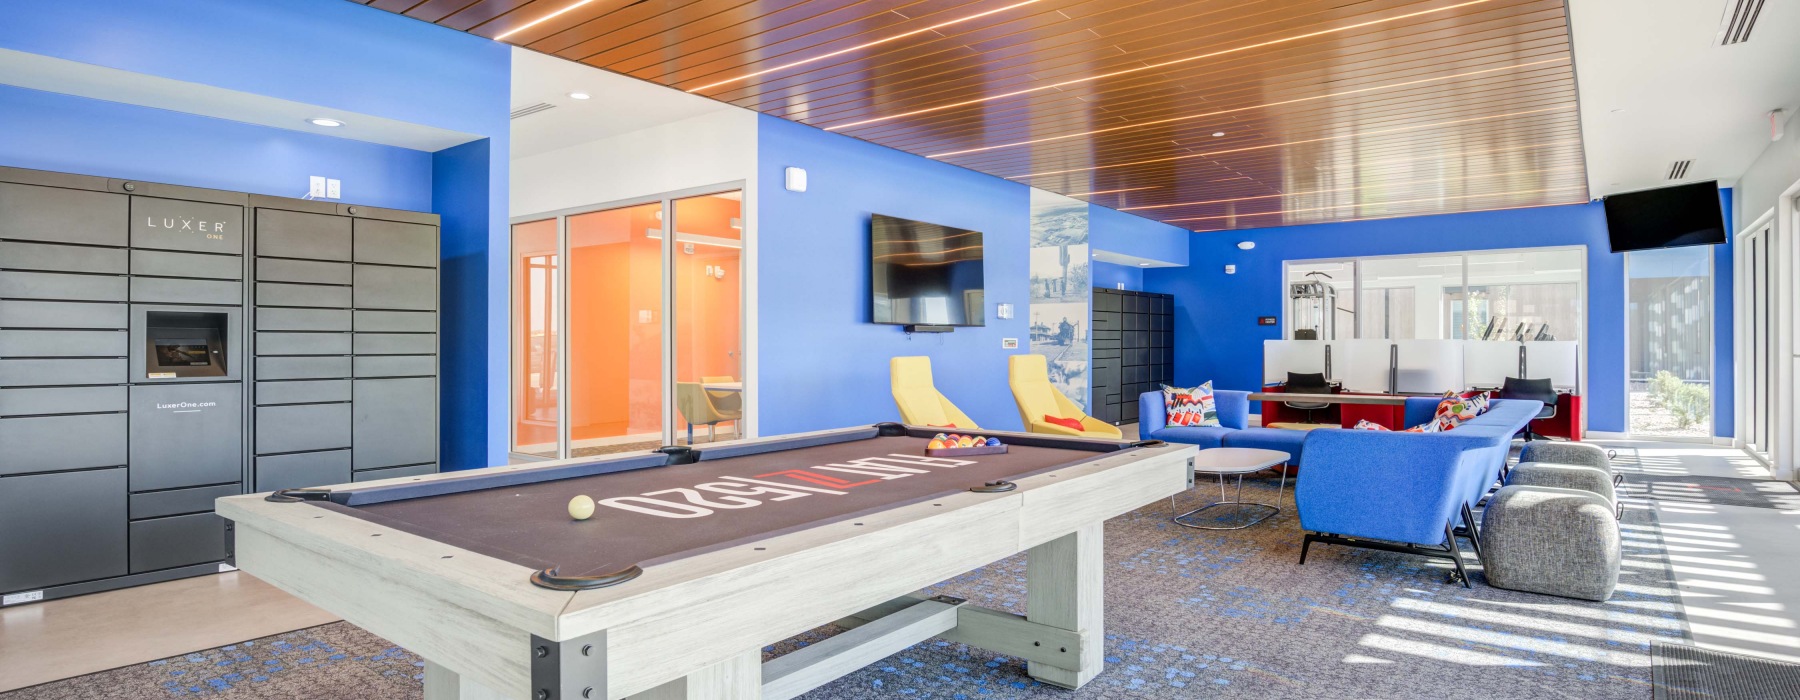 Indoor entertainment space with billiards and TV lounge, Large windows, LED lighting